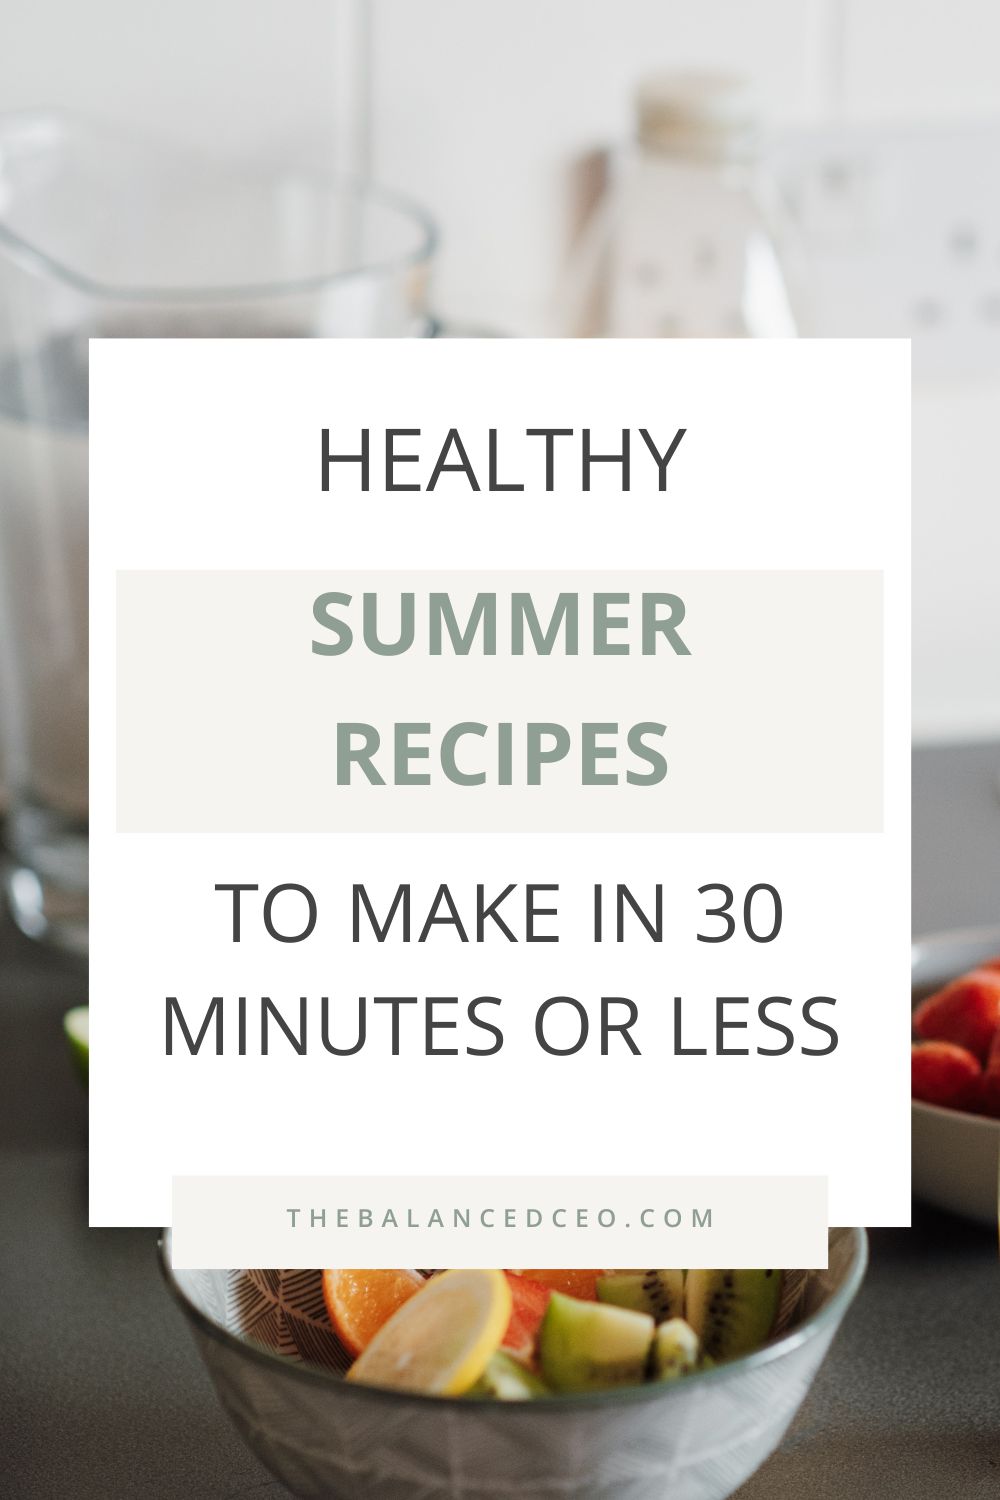 Healthy Summer Recipes to Make in 30 Minutes or Less